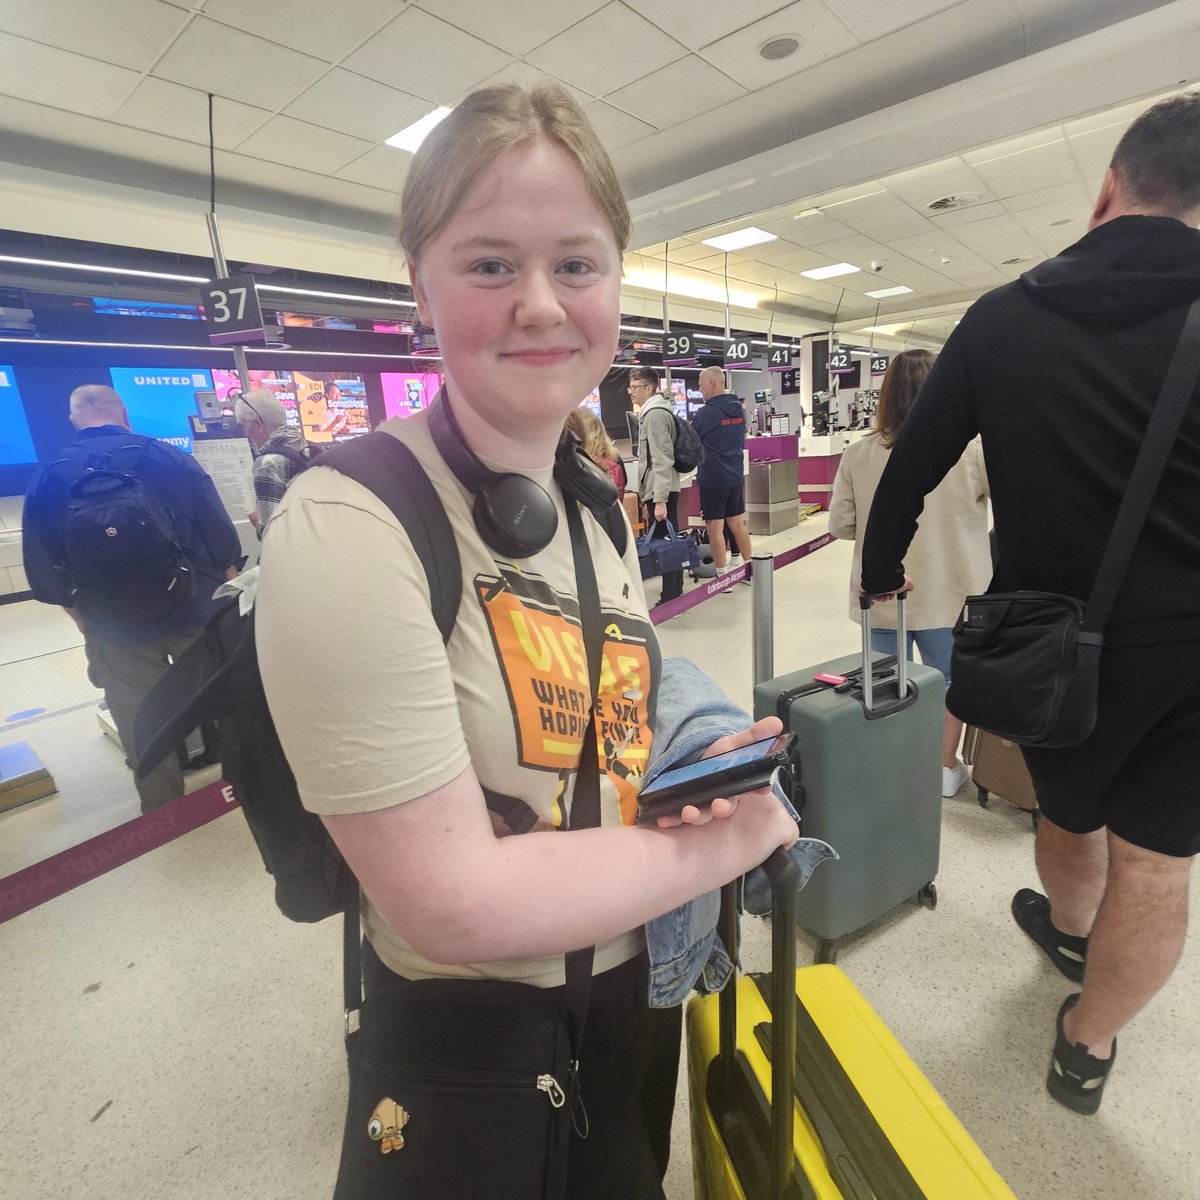 And she's off! 

Our daughter jets off to Camp America this morning.

Going be a great experience for her but I'm currently working my way through a box of tissues 😭